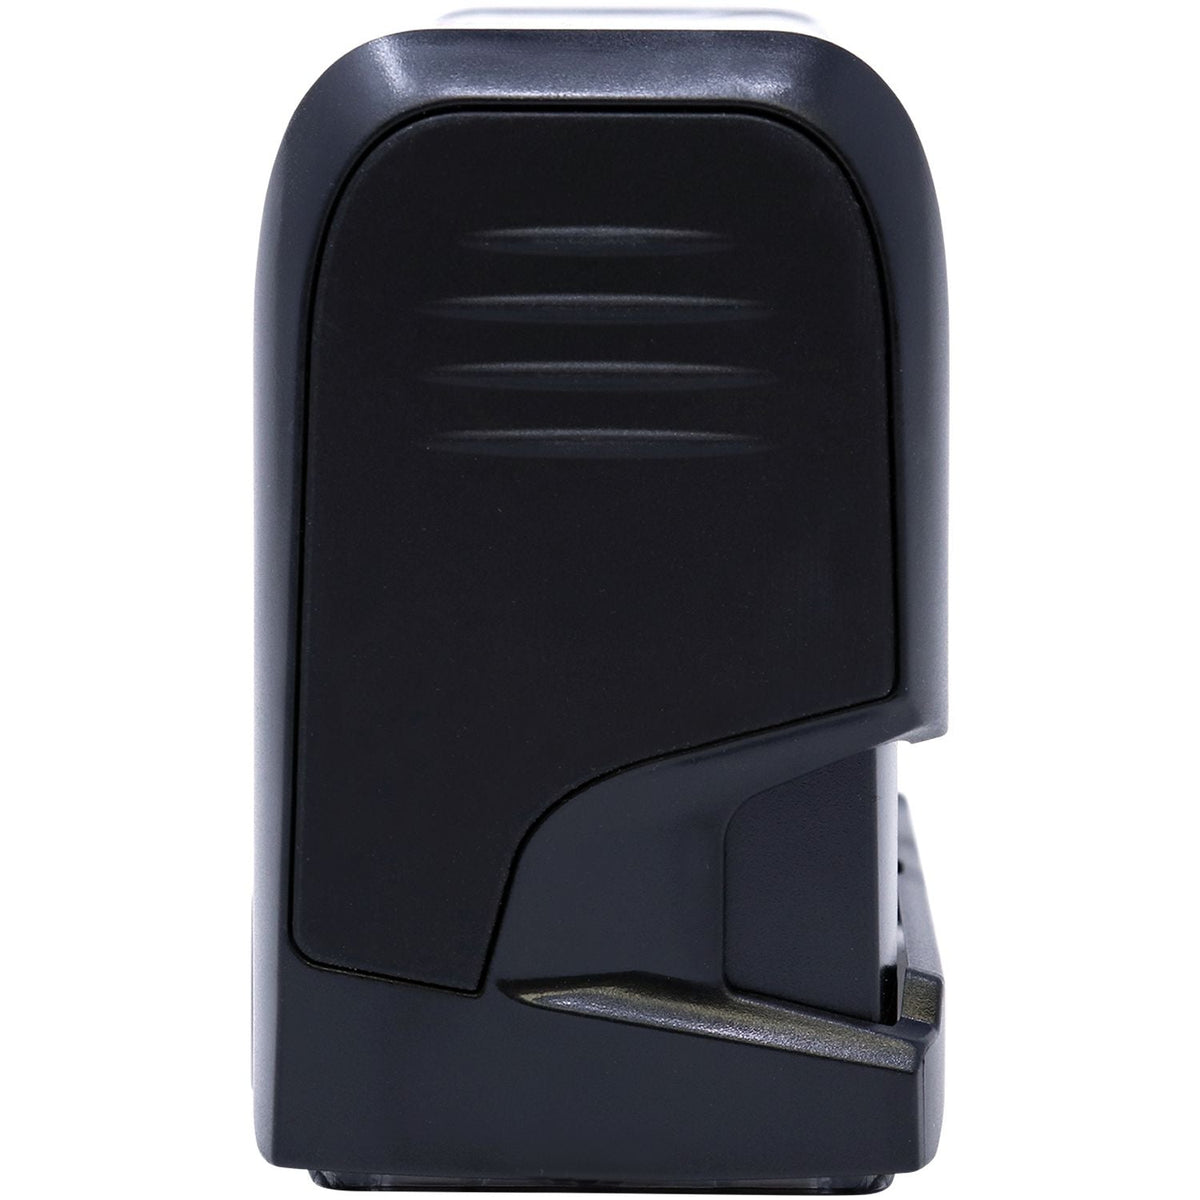 Alt View Self-Inking No Mail Receptacle Stamp Mount Closed